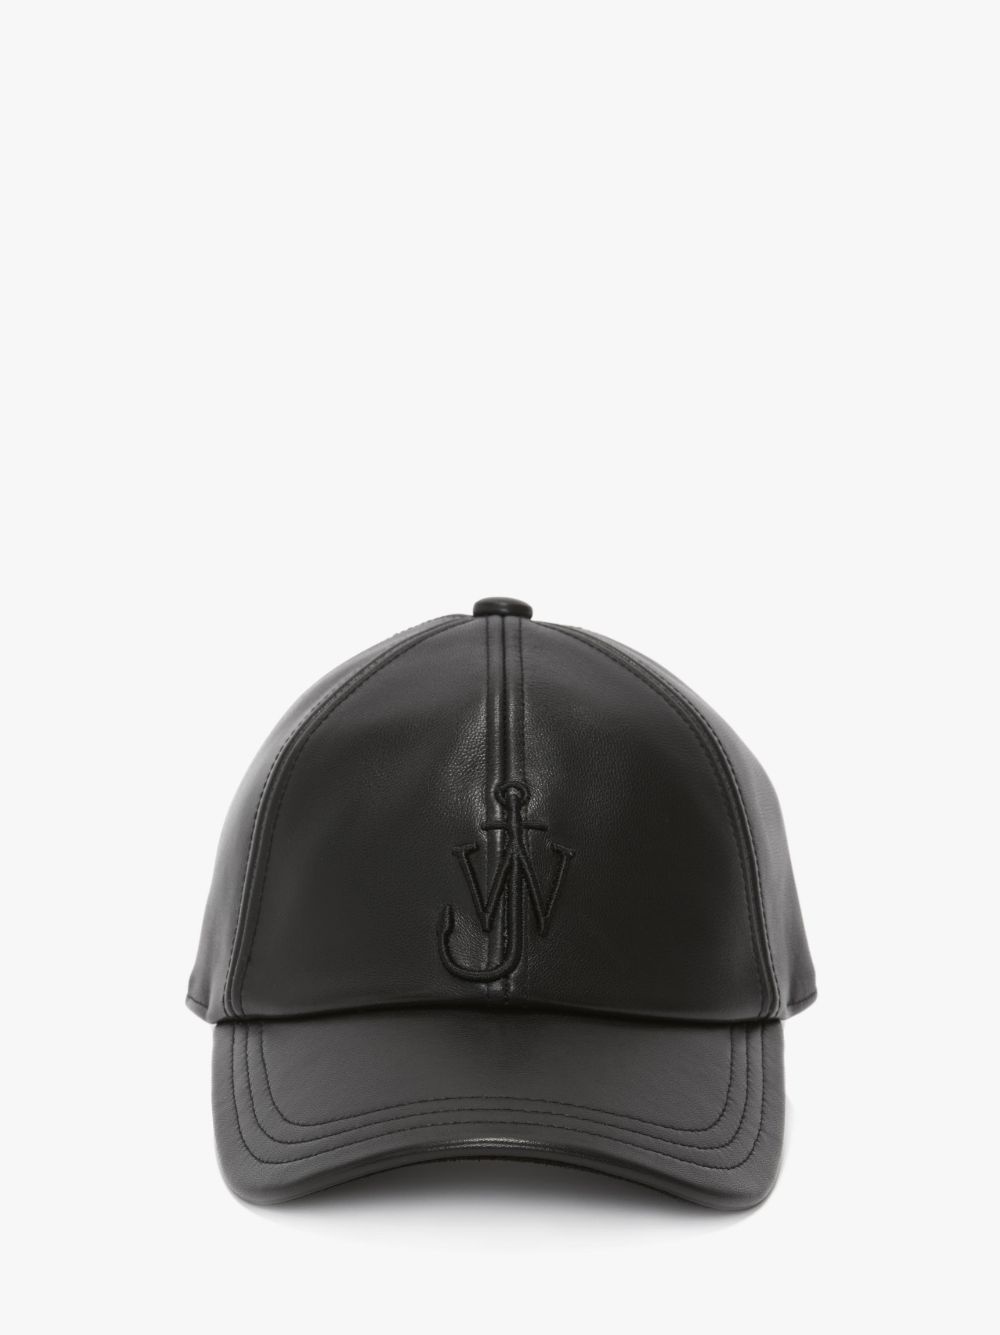 LEATHER BASEBALL CAP WITH ANCHOR LOGO - 1